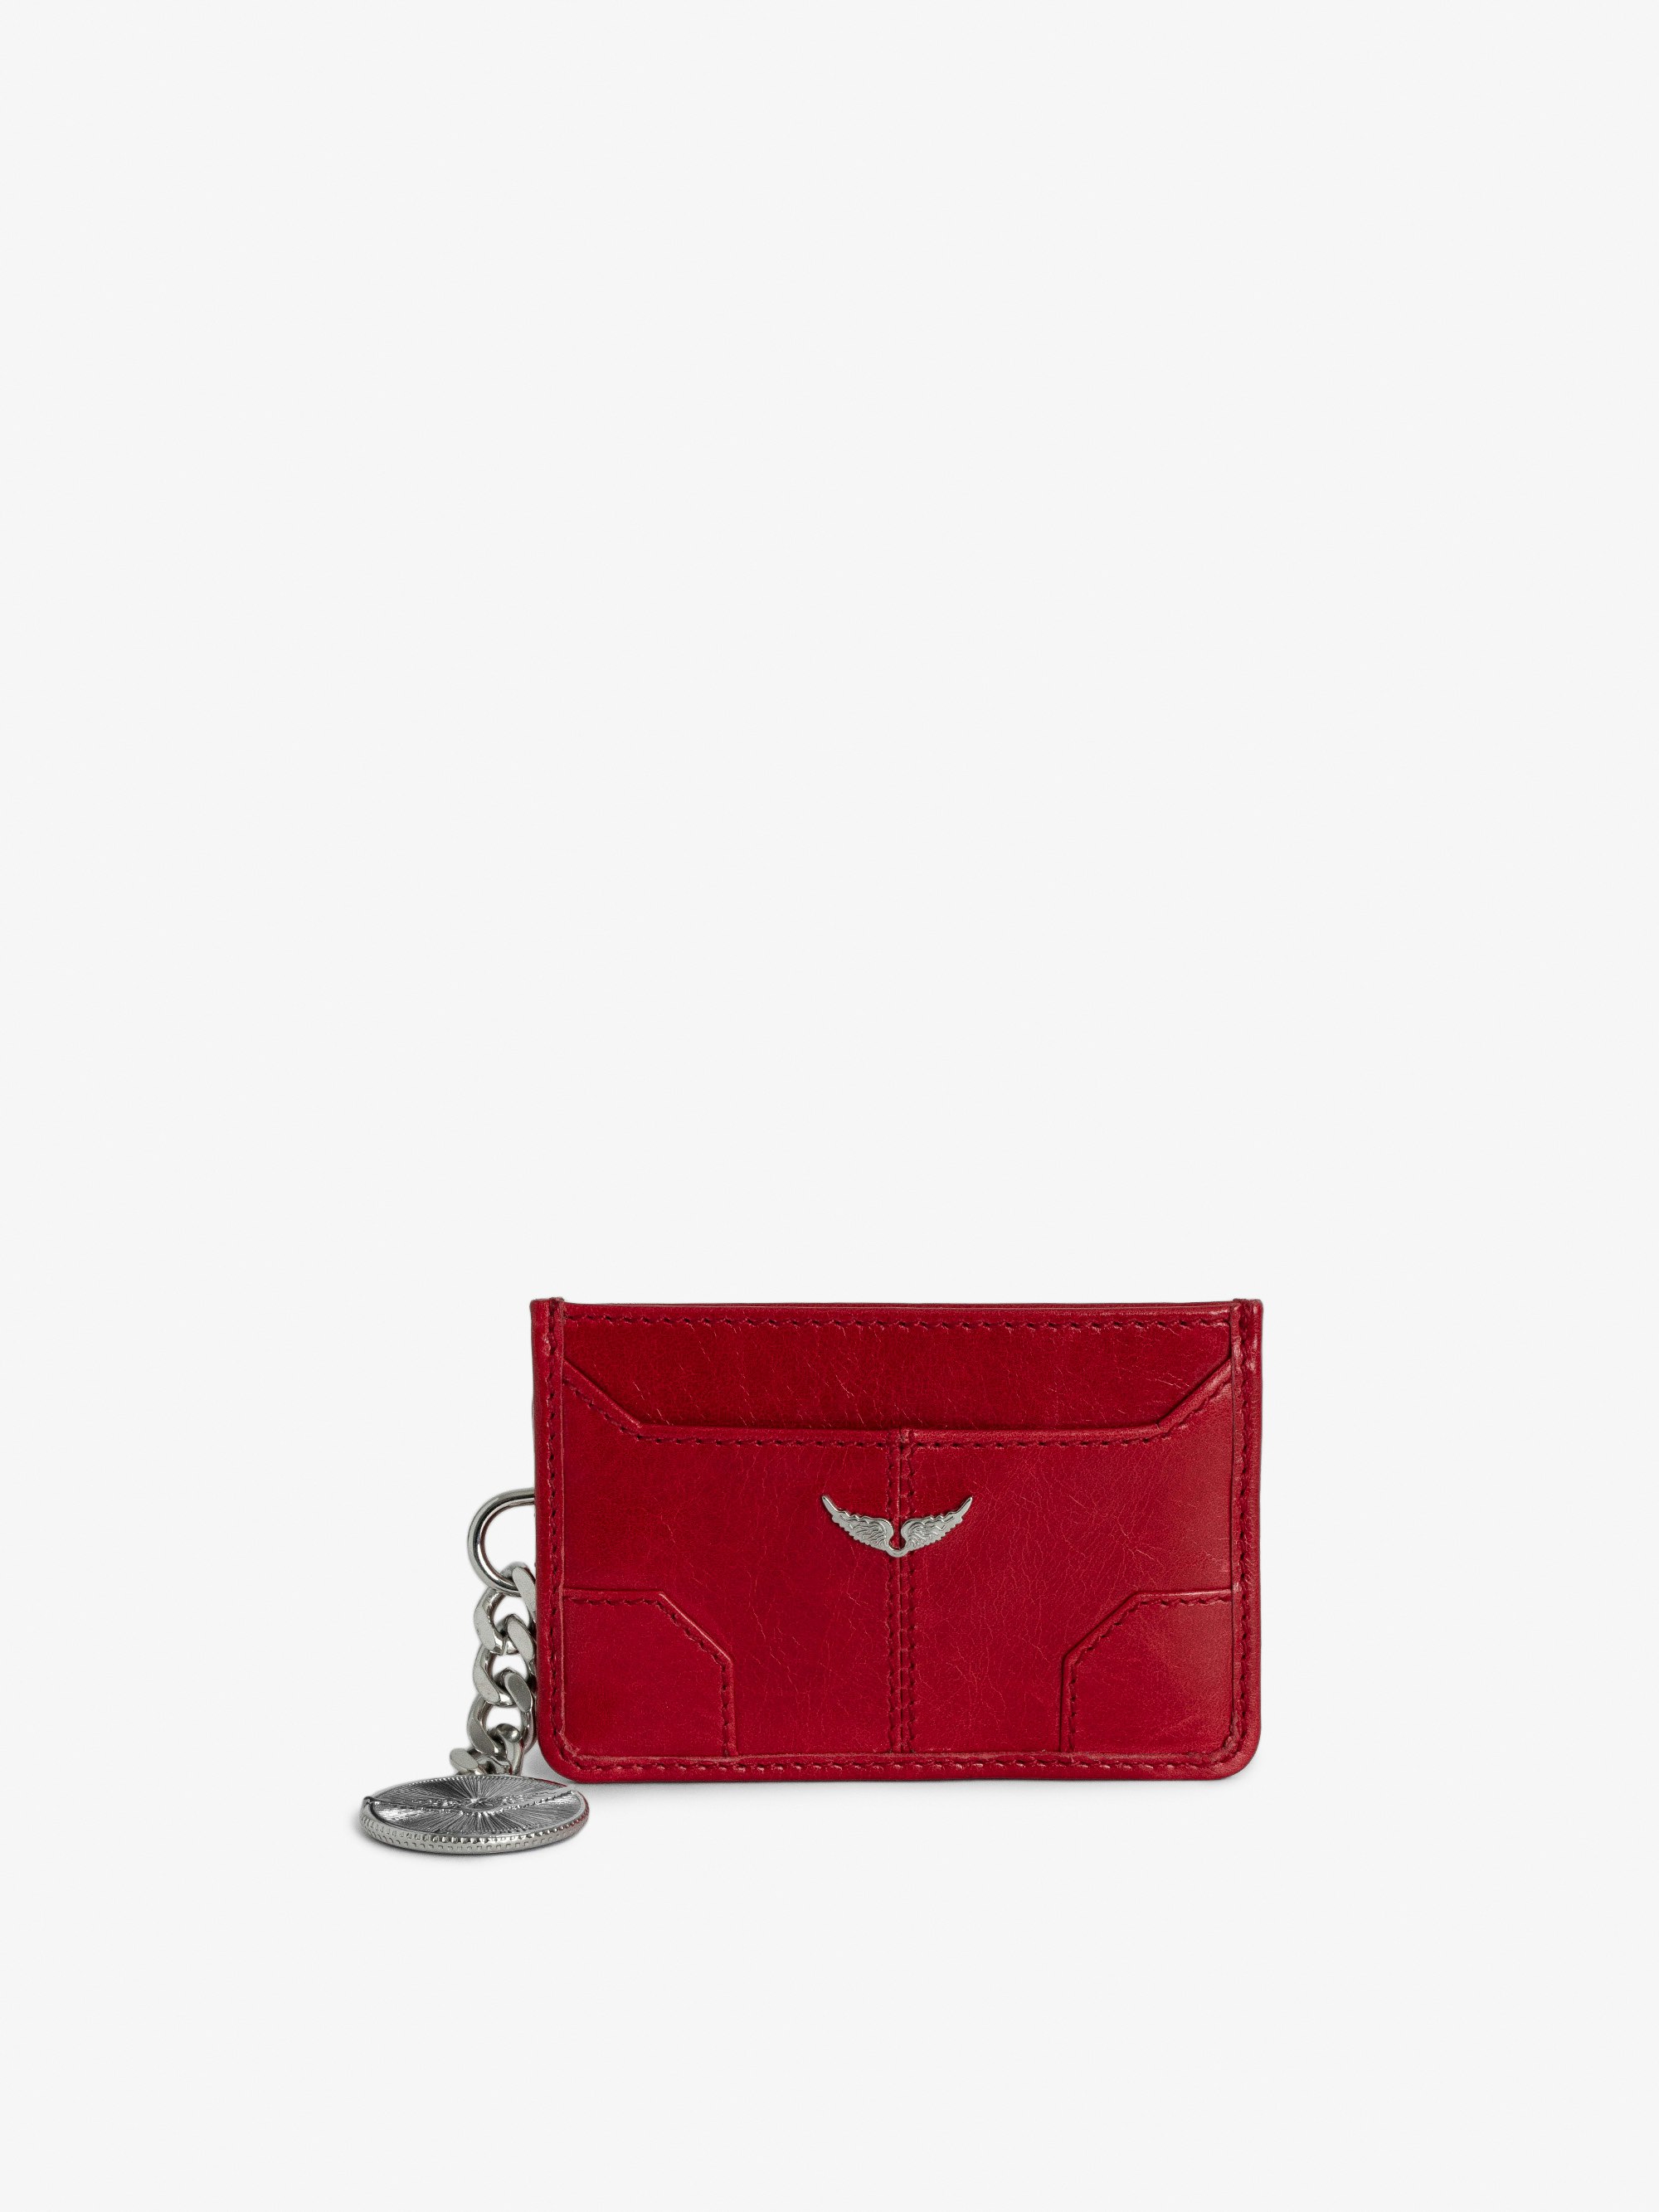 Sunny Pass Card Holder - Vintage-effect patent leather card holder with medallion charm and signature wings.